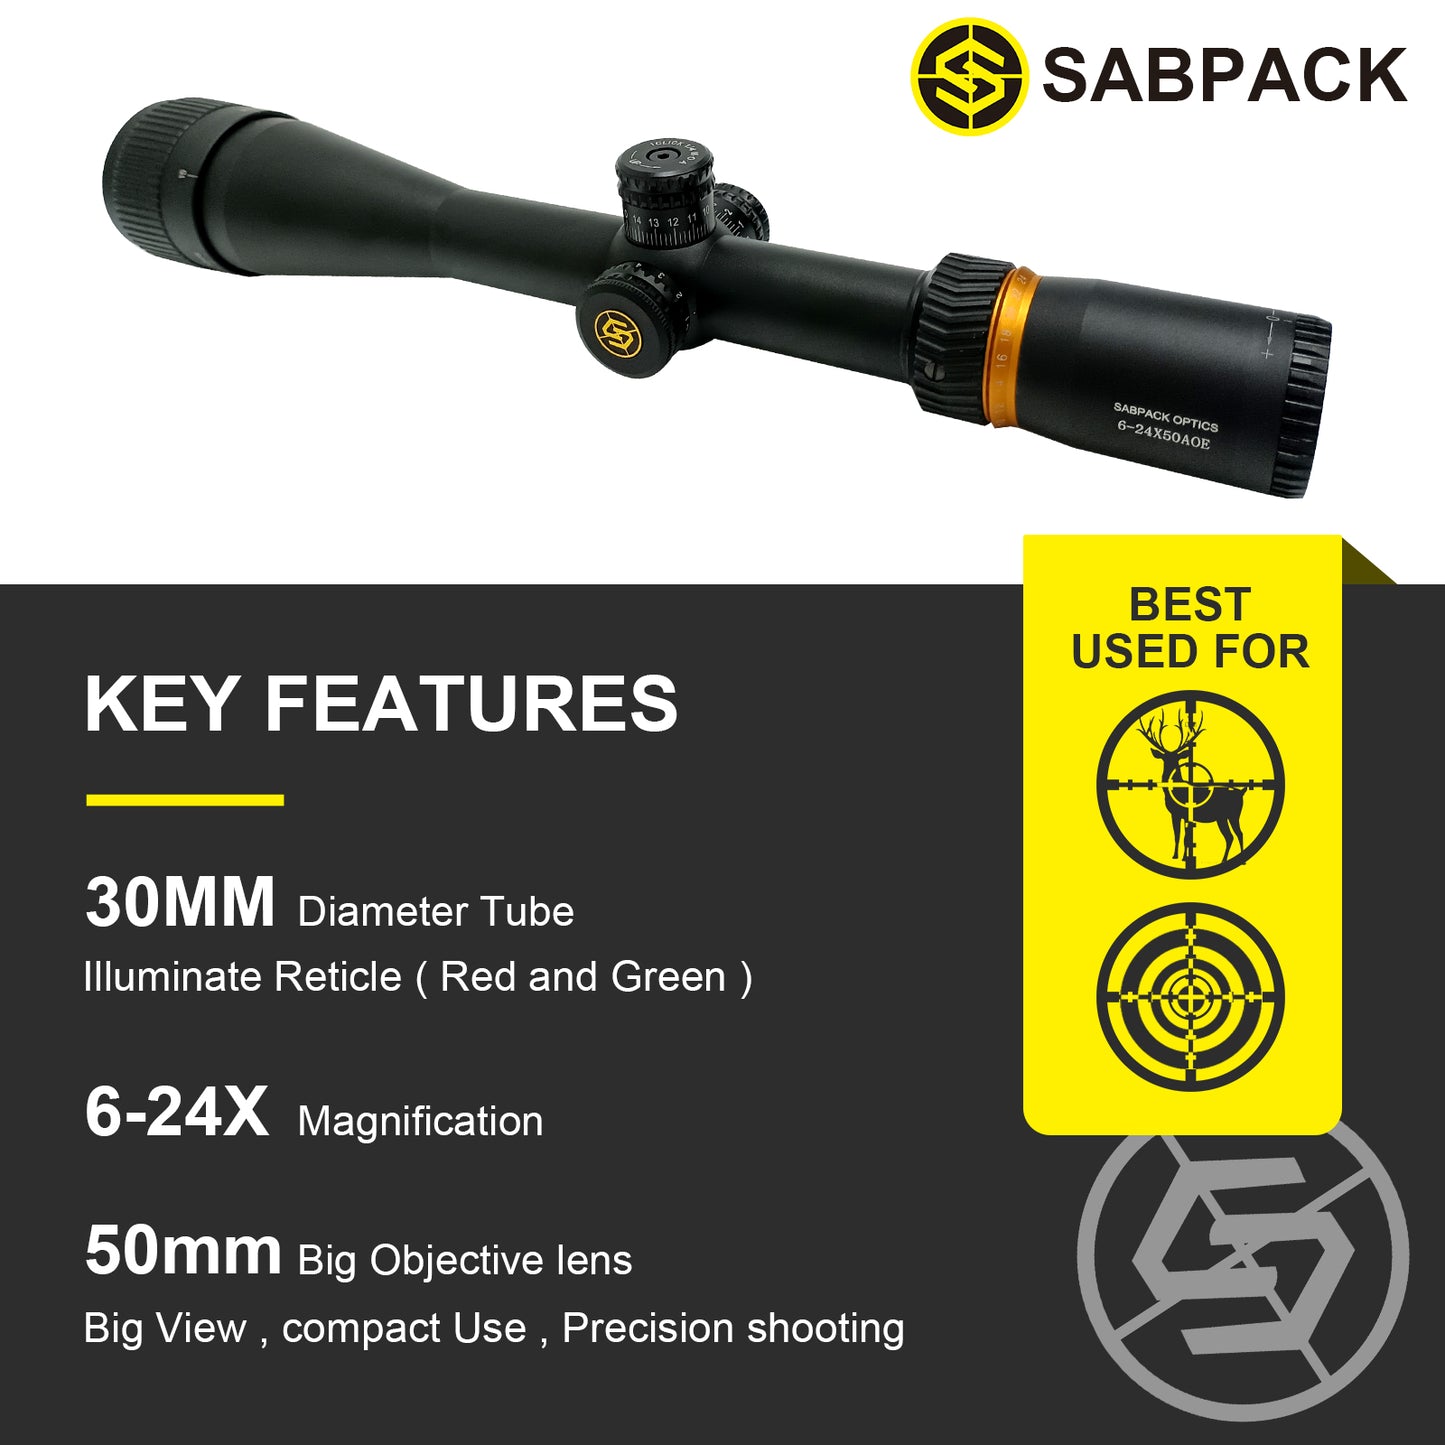 SABPACK 6-24x50 Rifle Scope illumination Reticle, Adjustable Objective, Second Focal Plane, 30mm Tube Riflescopes with strong mounts